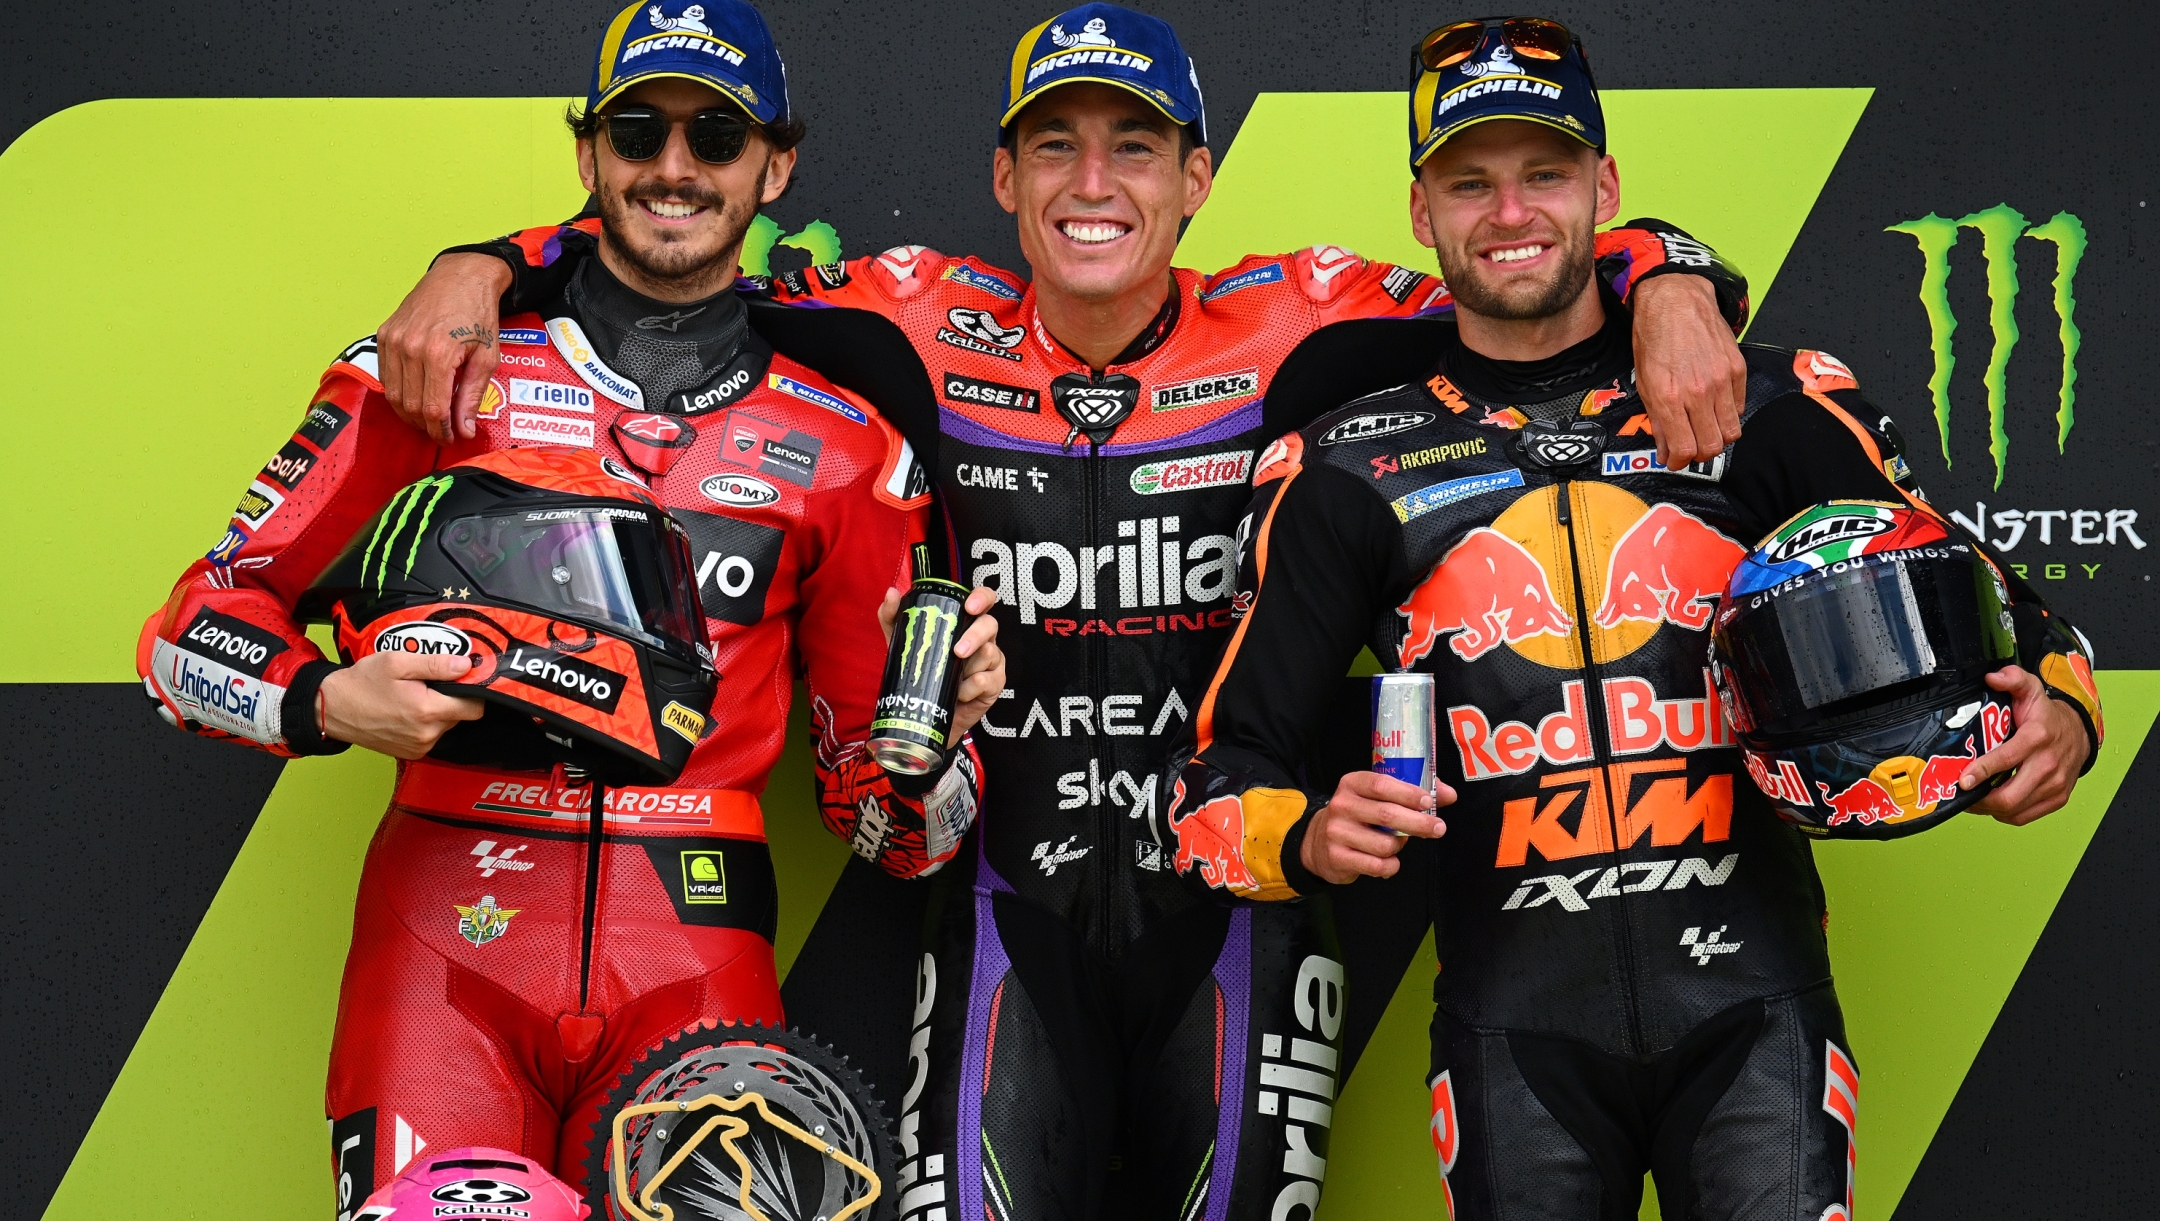 NORTHAMPTON, ENGLAND - AUGUST 06: (Left To Right) Francesco Bagnaia of Italy, second placed rider, Aleix Espargaro of Spain, race winner and Brad Binder of South Africa, third placed rider celebrate on the podium after the MotoGP of Great Britain - Race at Silverstone Circuit on August 06, 2023 in Northampton, England. (Photo by Clive Mason/Getty Images)